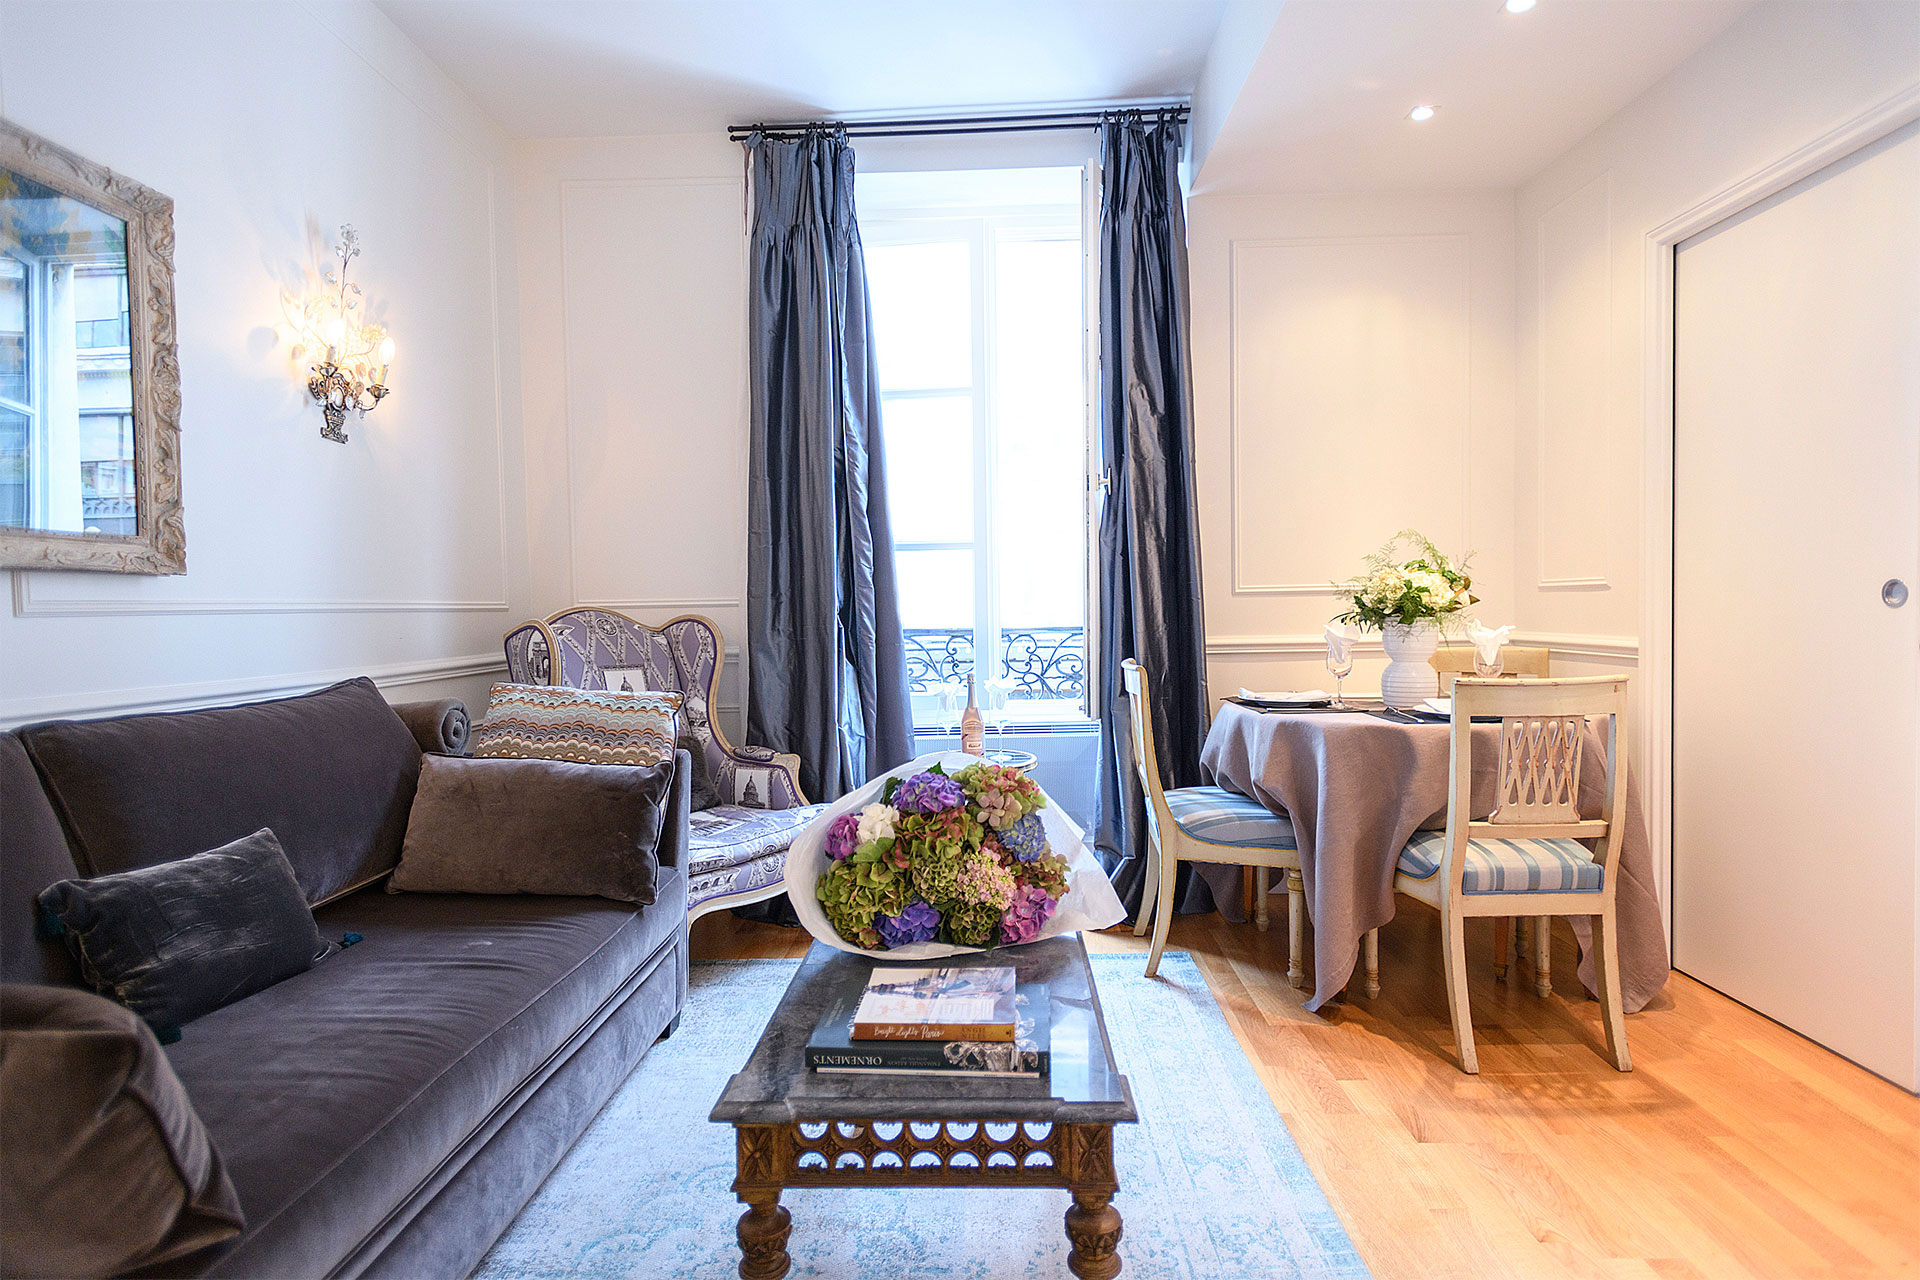 Stunning 1 Bedroom Apartment In The Chic Saint Germain Area - 